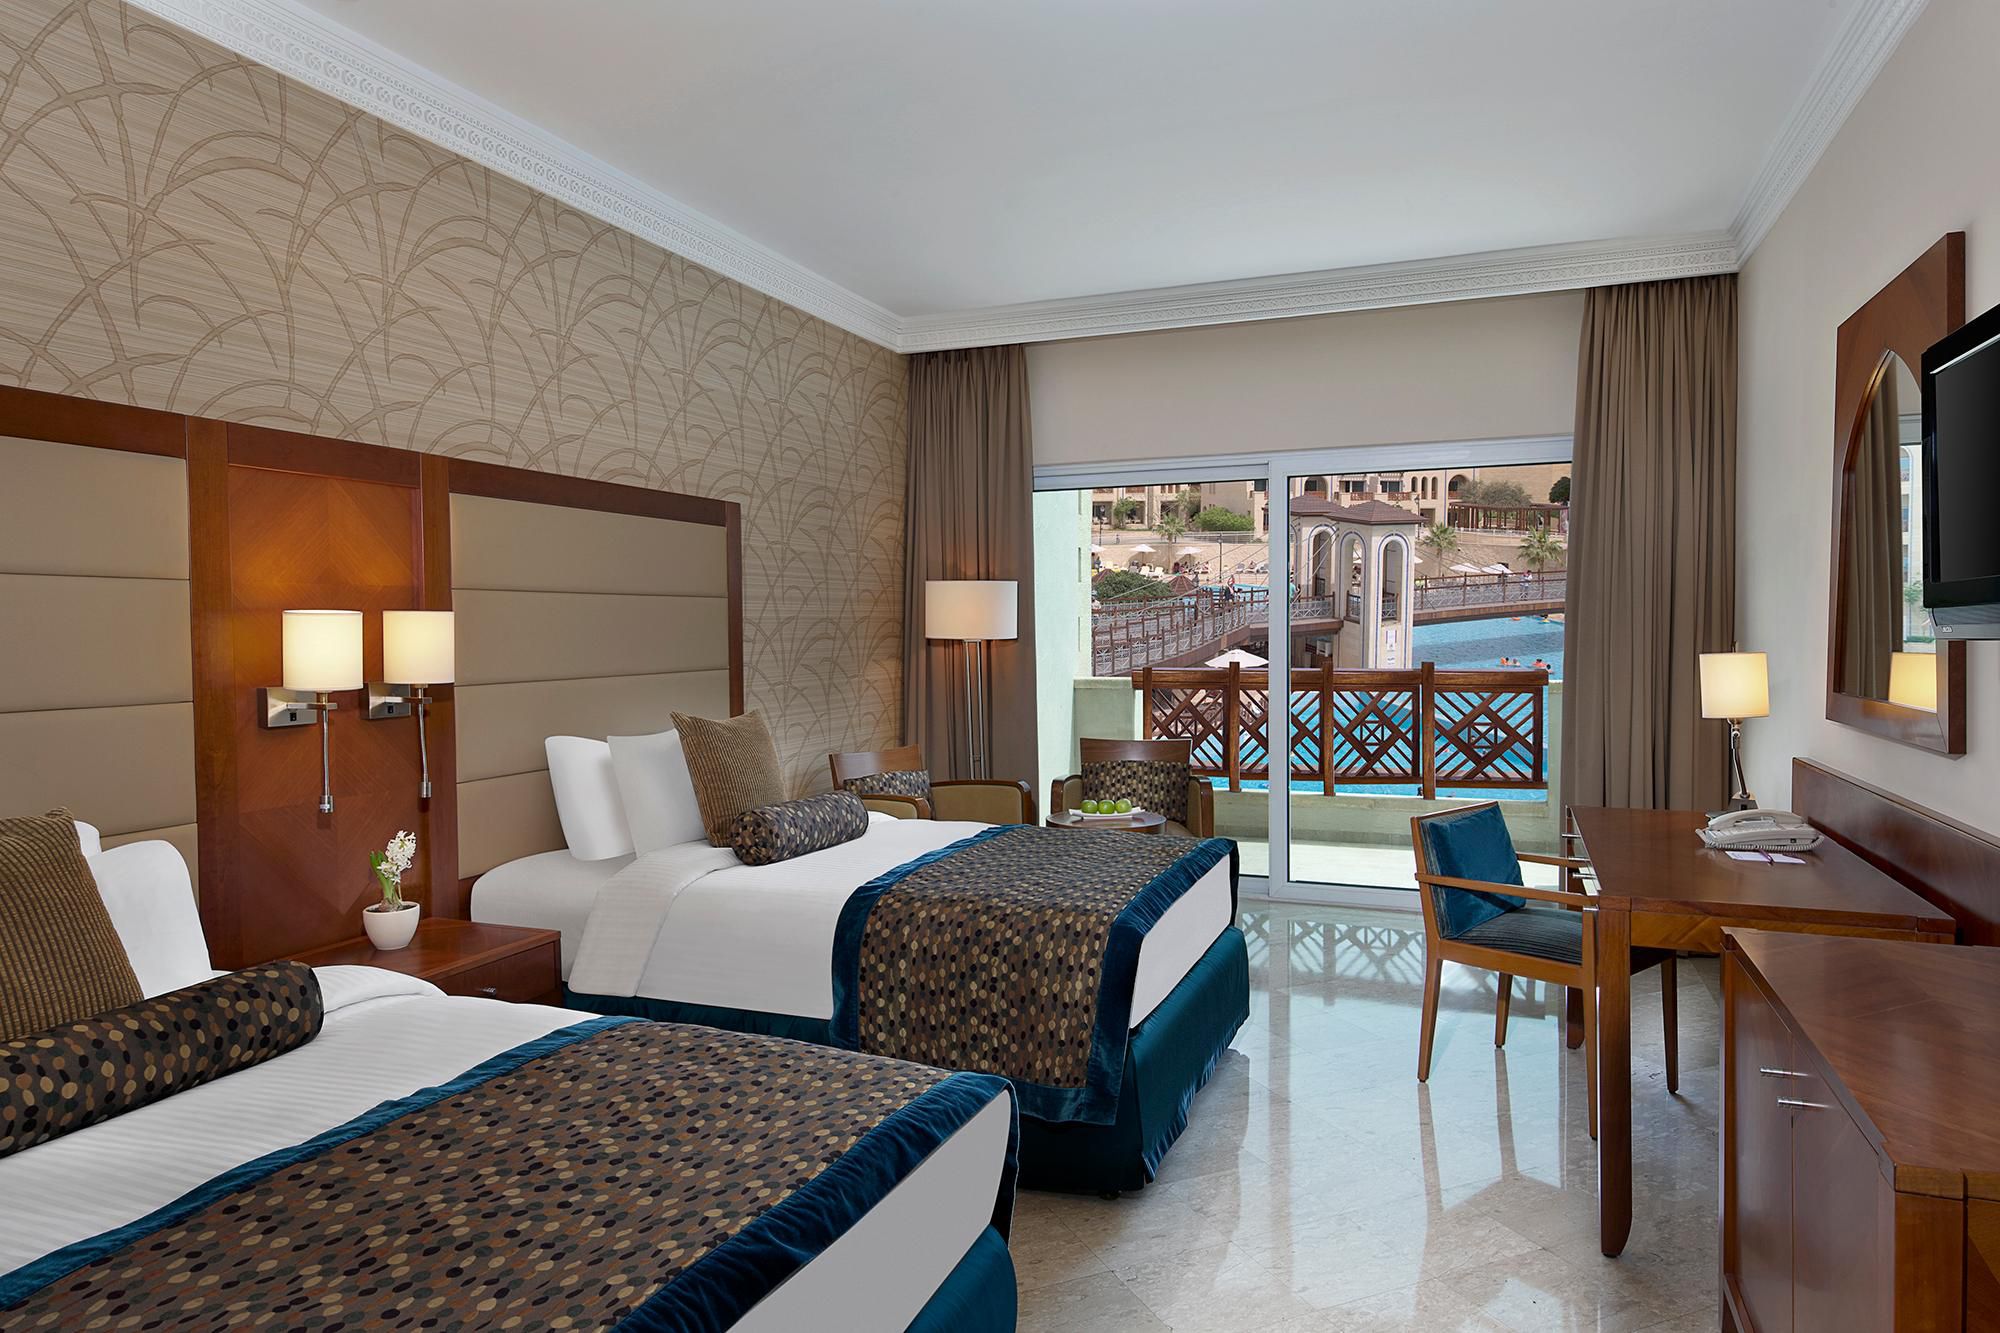 Unmatched beauty from the view of your room